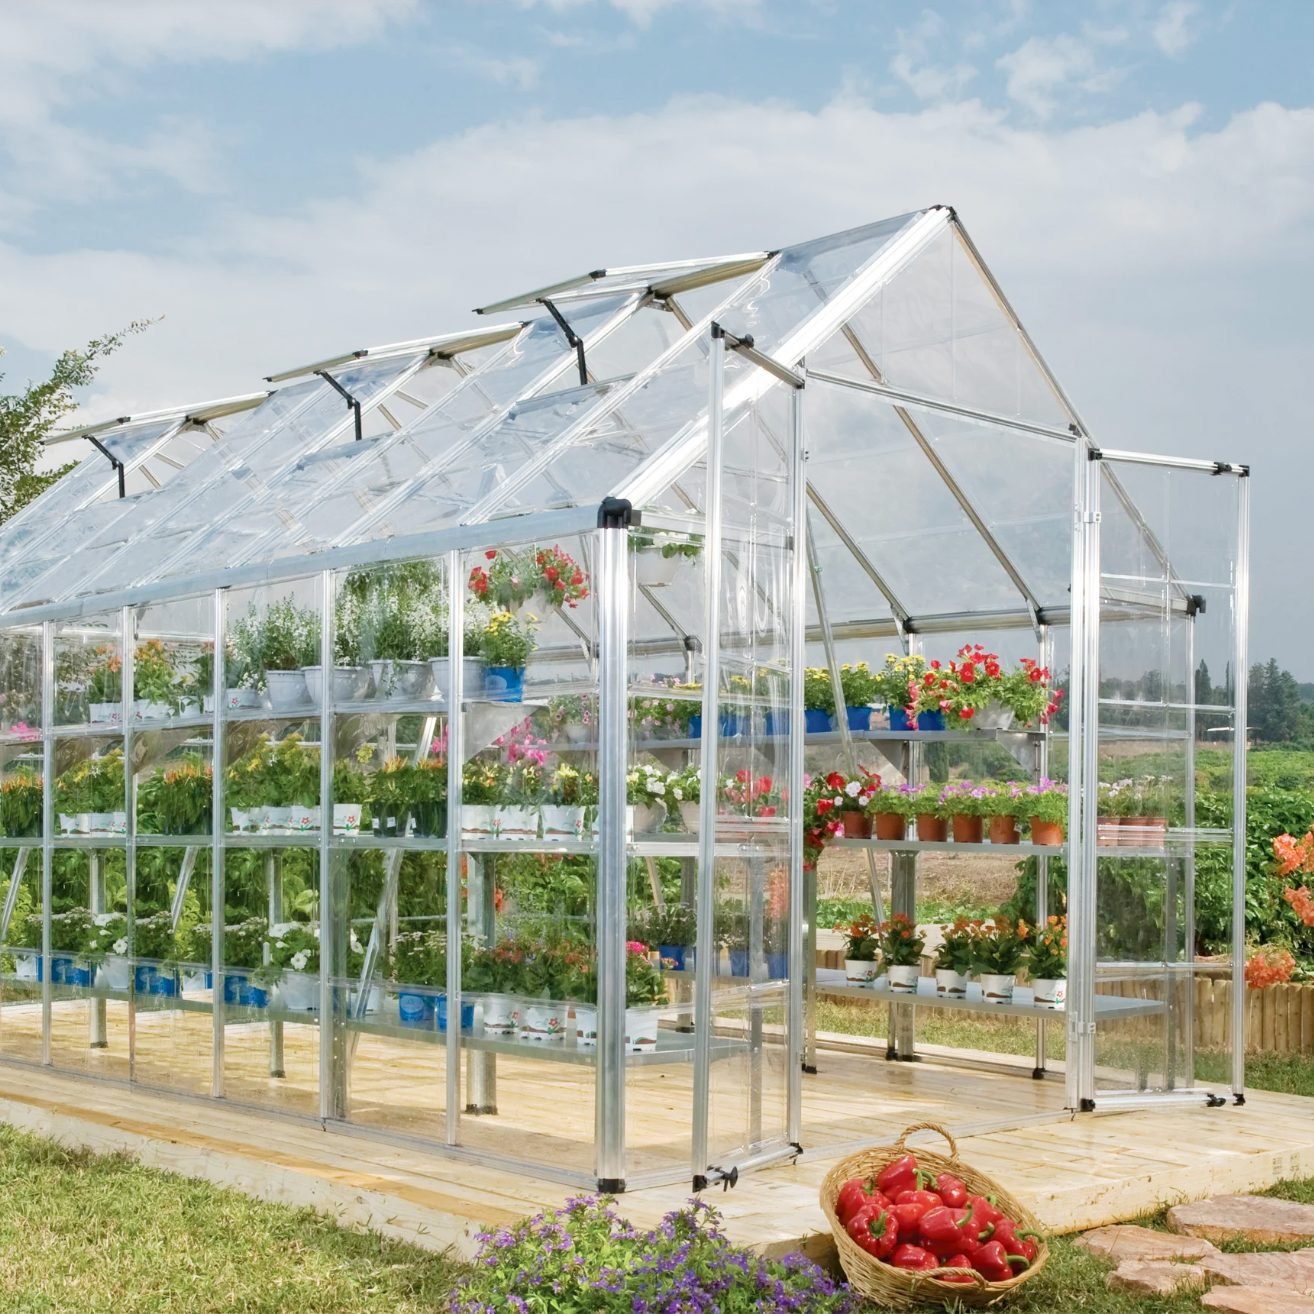 Greenhouse Supplies for Sale